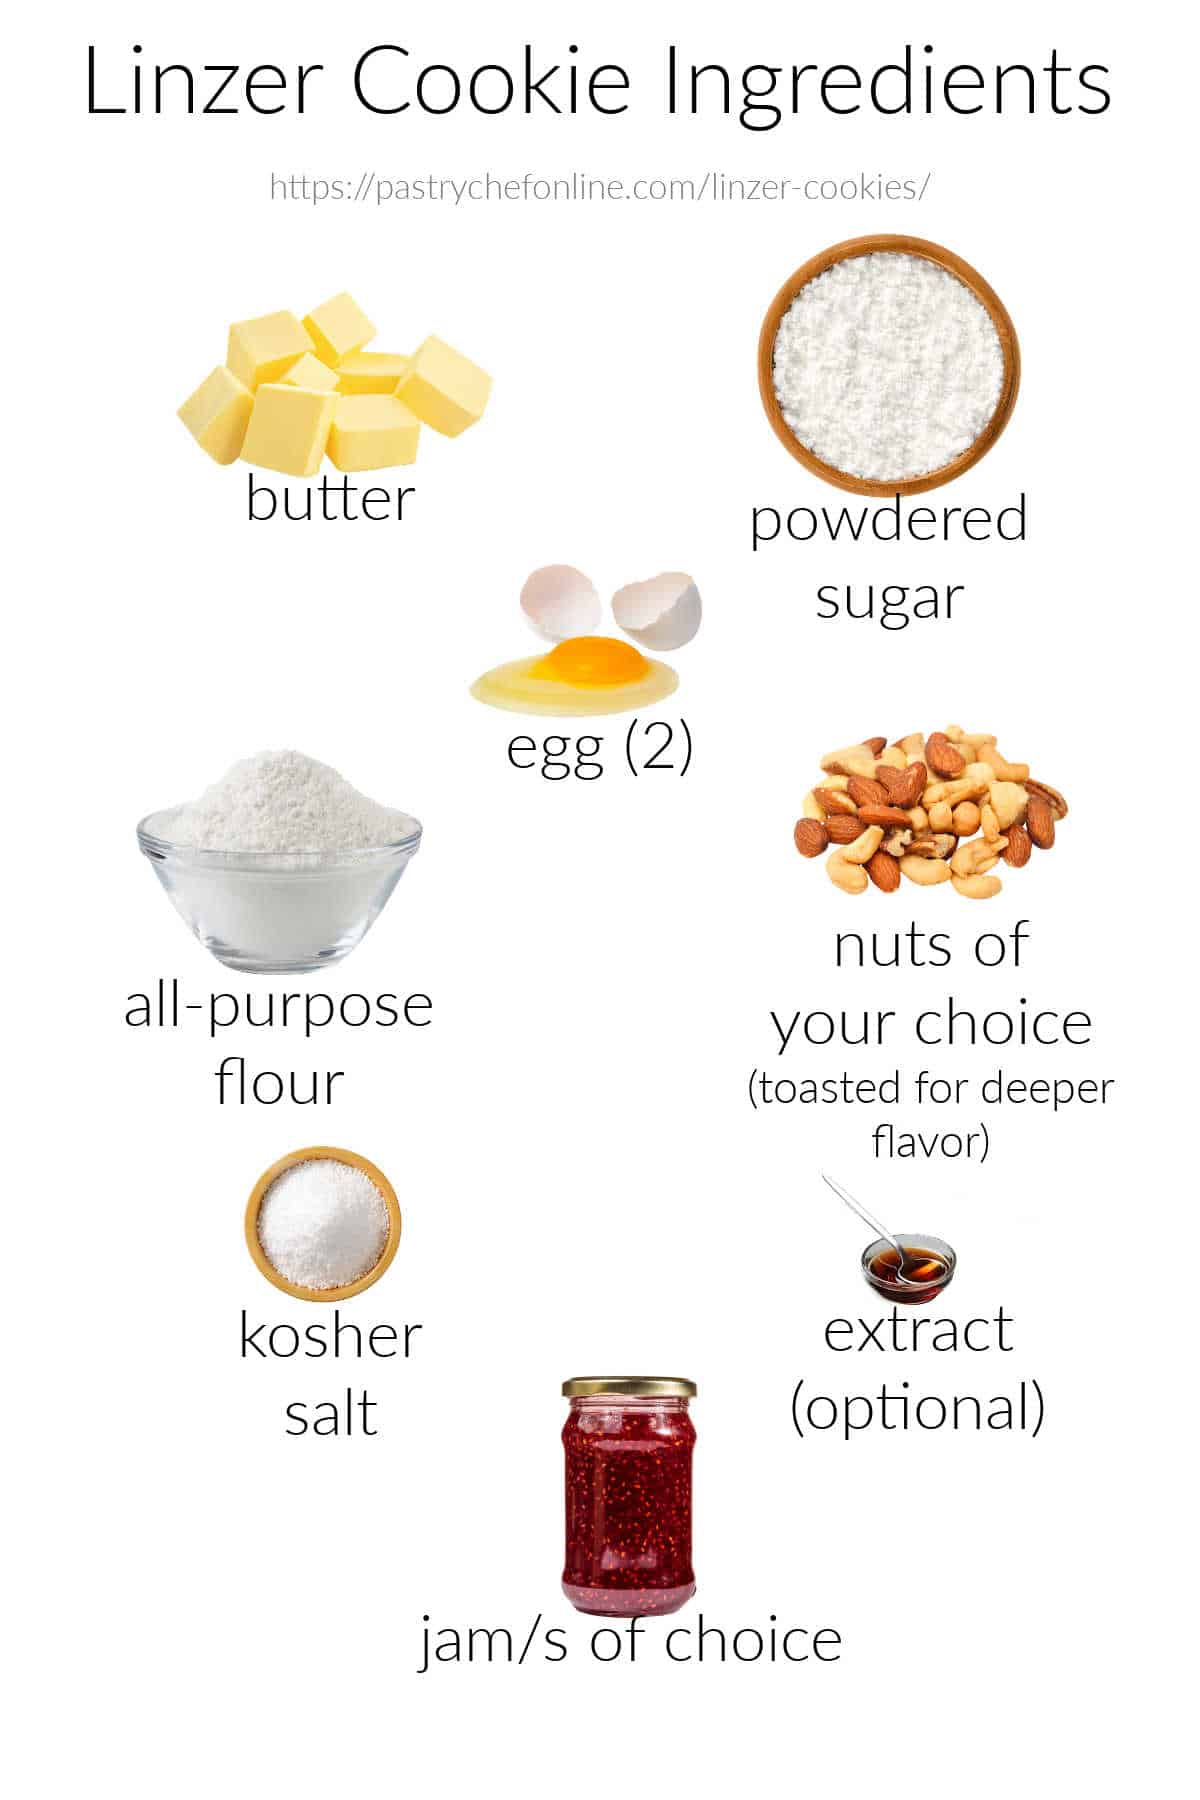 The ingredients needed to make Linzer cookies: butter, powdered sugar, eggs, all-purpose flour, finely chopped nuts, salt, extract (optional), and jam/s of choice.